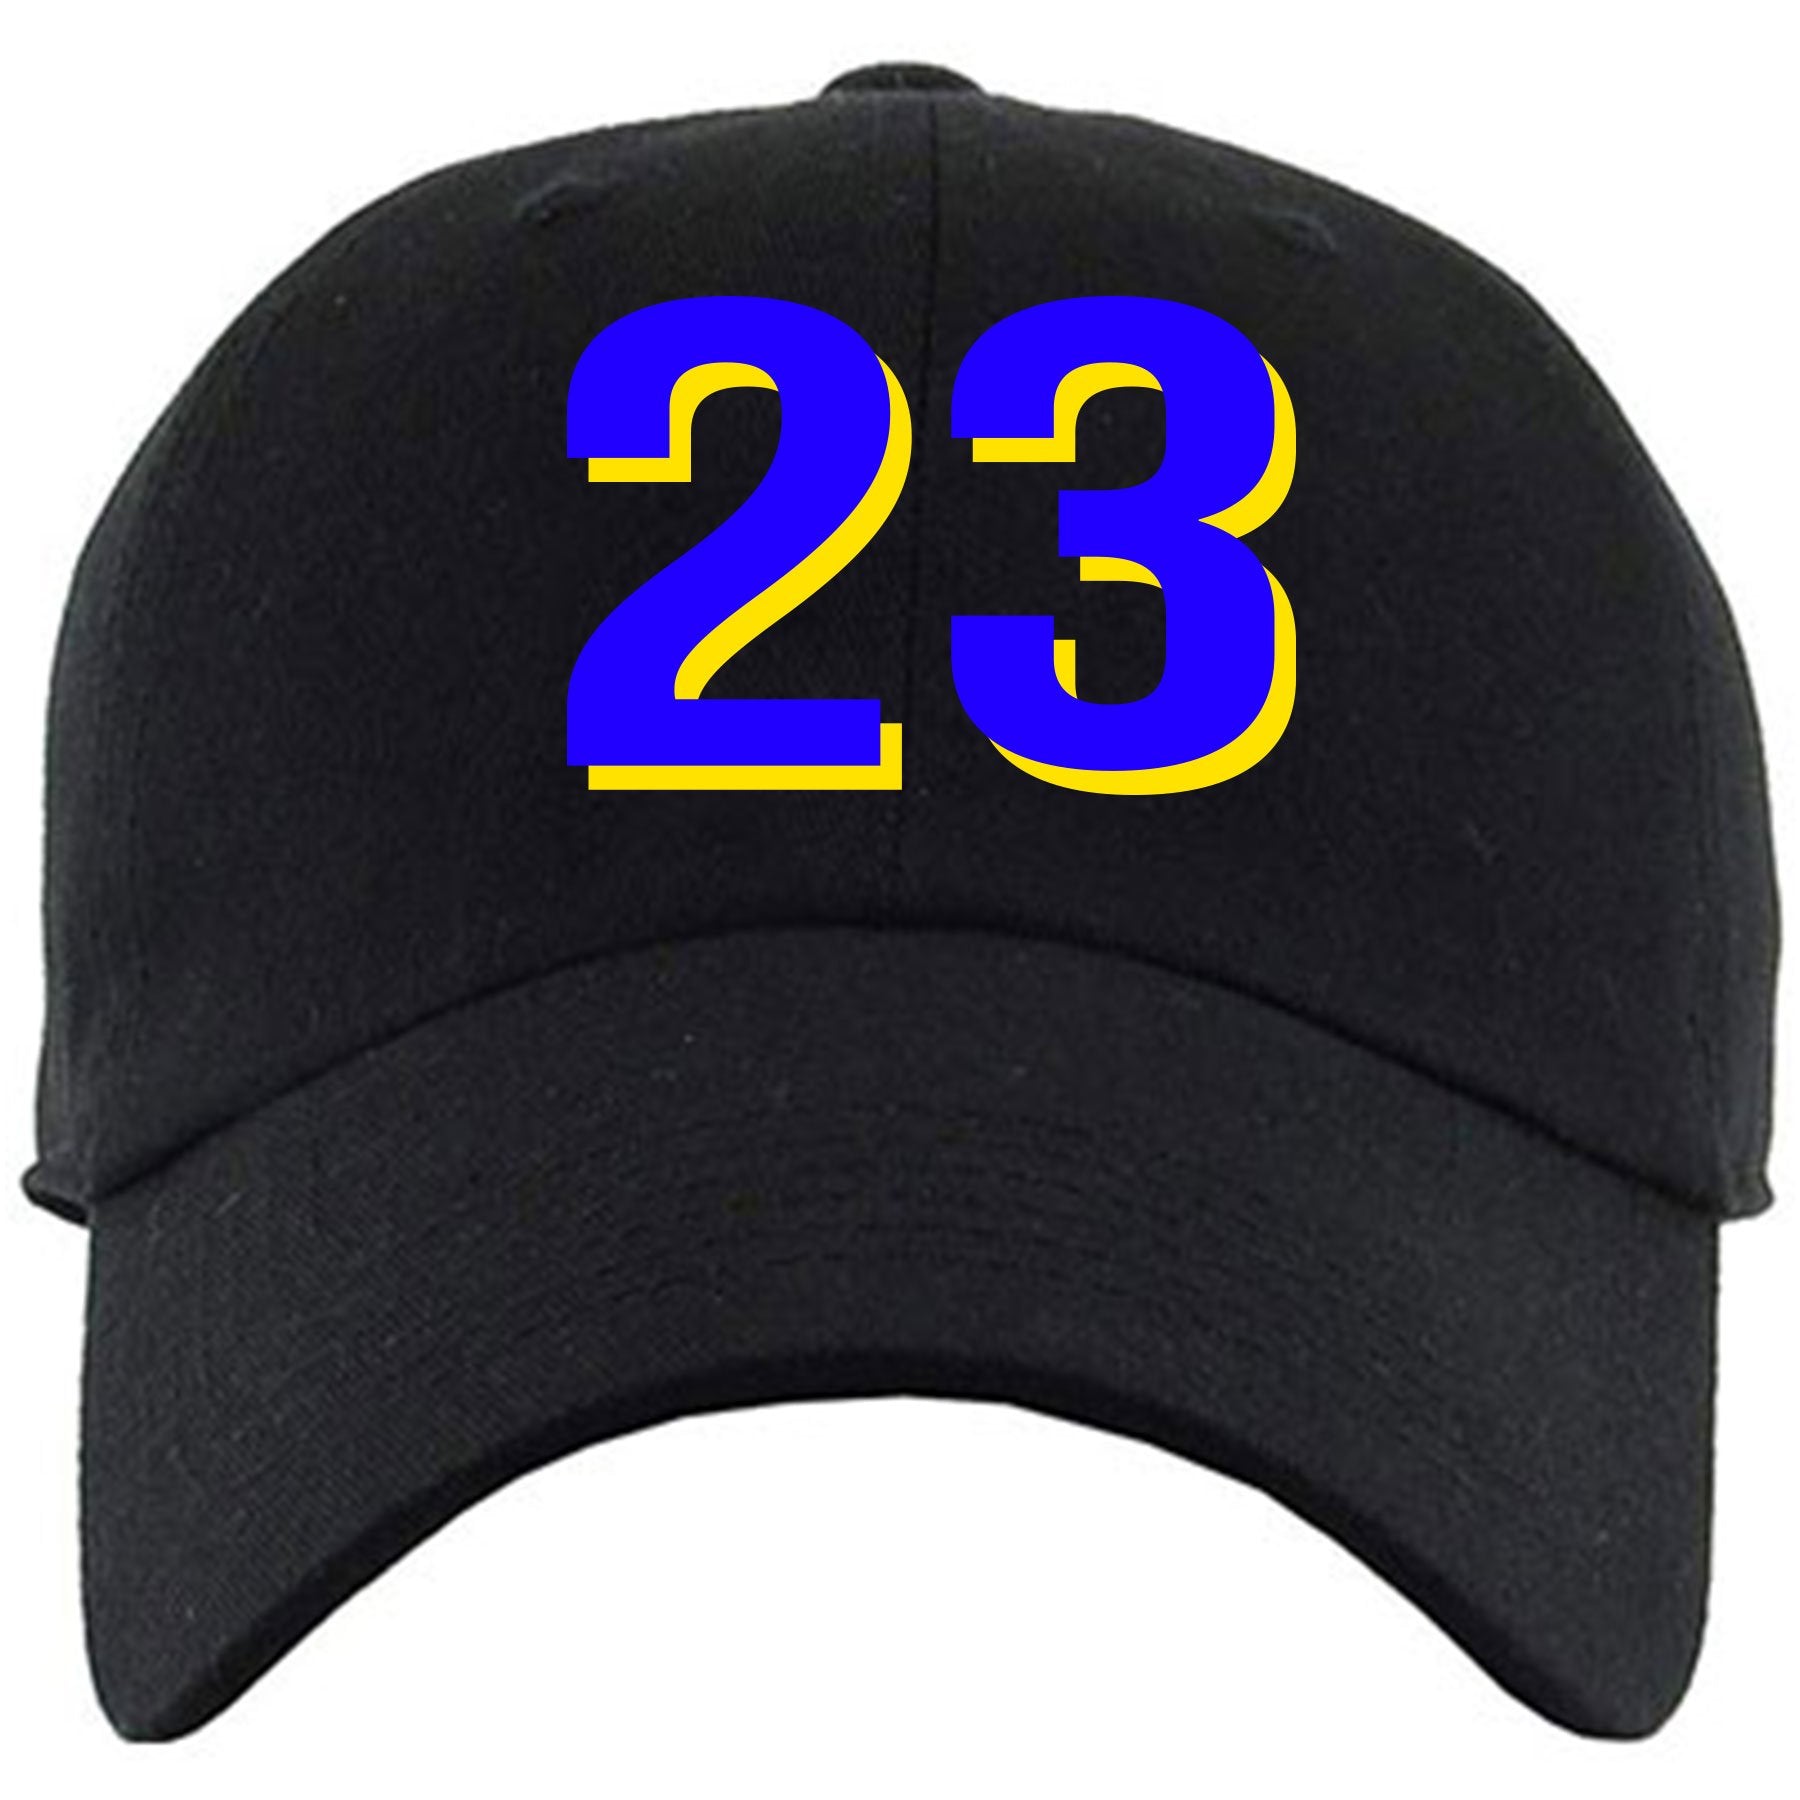 Embroidered on the front of the Jordan 5 Laney sneaker matching dad hat is the 23 logo in blue and yellow